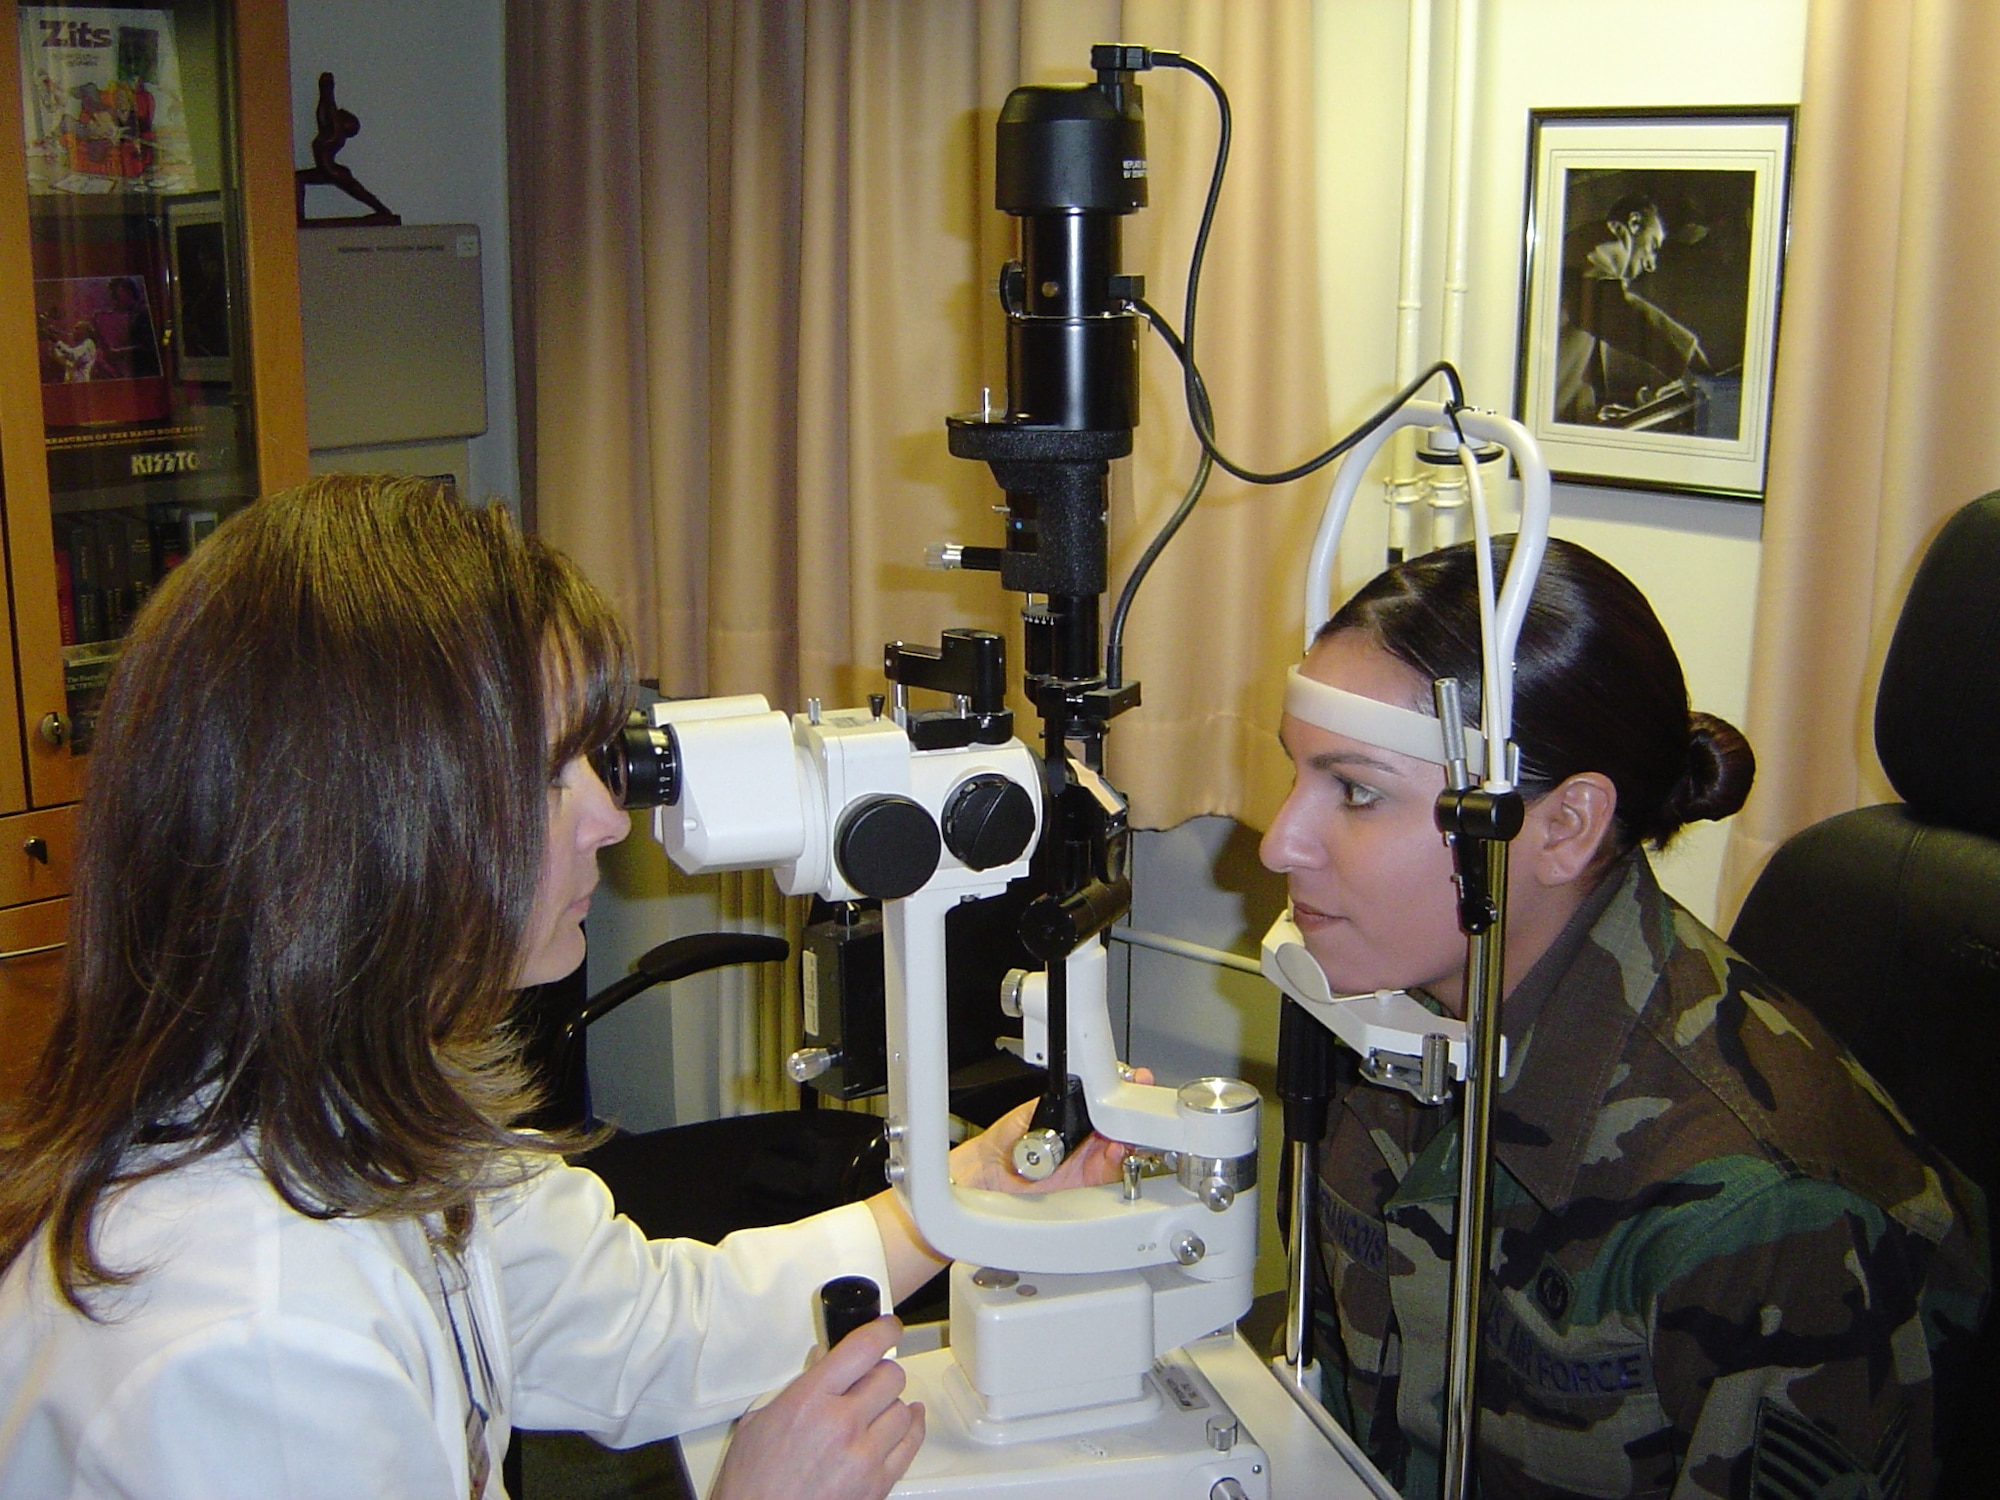 SPANGDAHLEM AIR BASE, Germany -- Dr. Susan Sabers, Red Cross volunteer and optometrist, examines a patient. Since 2005, she examined more than 1,400 patients as a 52nd Aerospace Medicine Squadron volunteer, saving the Air Force nearly $142,000 in outsourcing costs to civilian physicians. Courtesy photo 